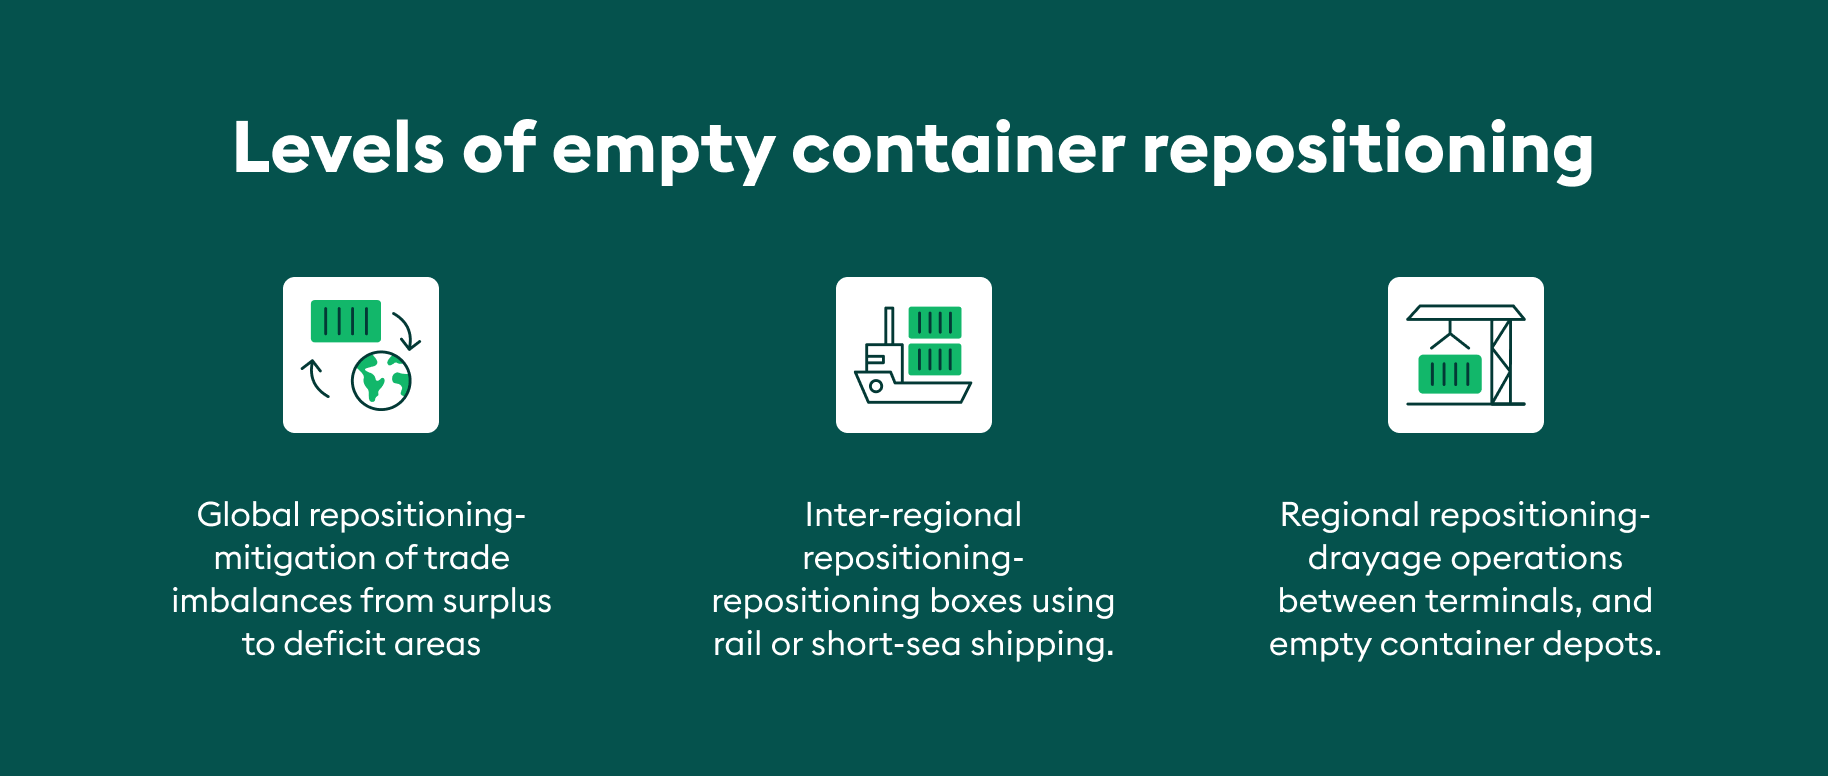 levels of empty container repositioning